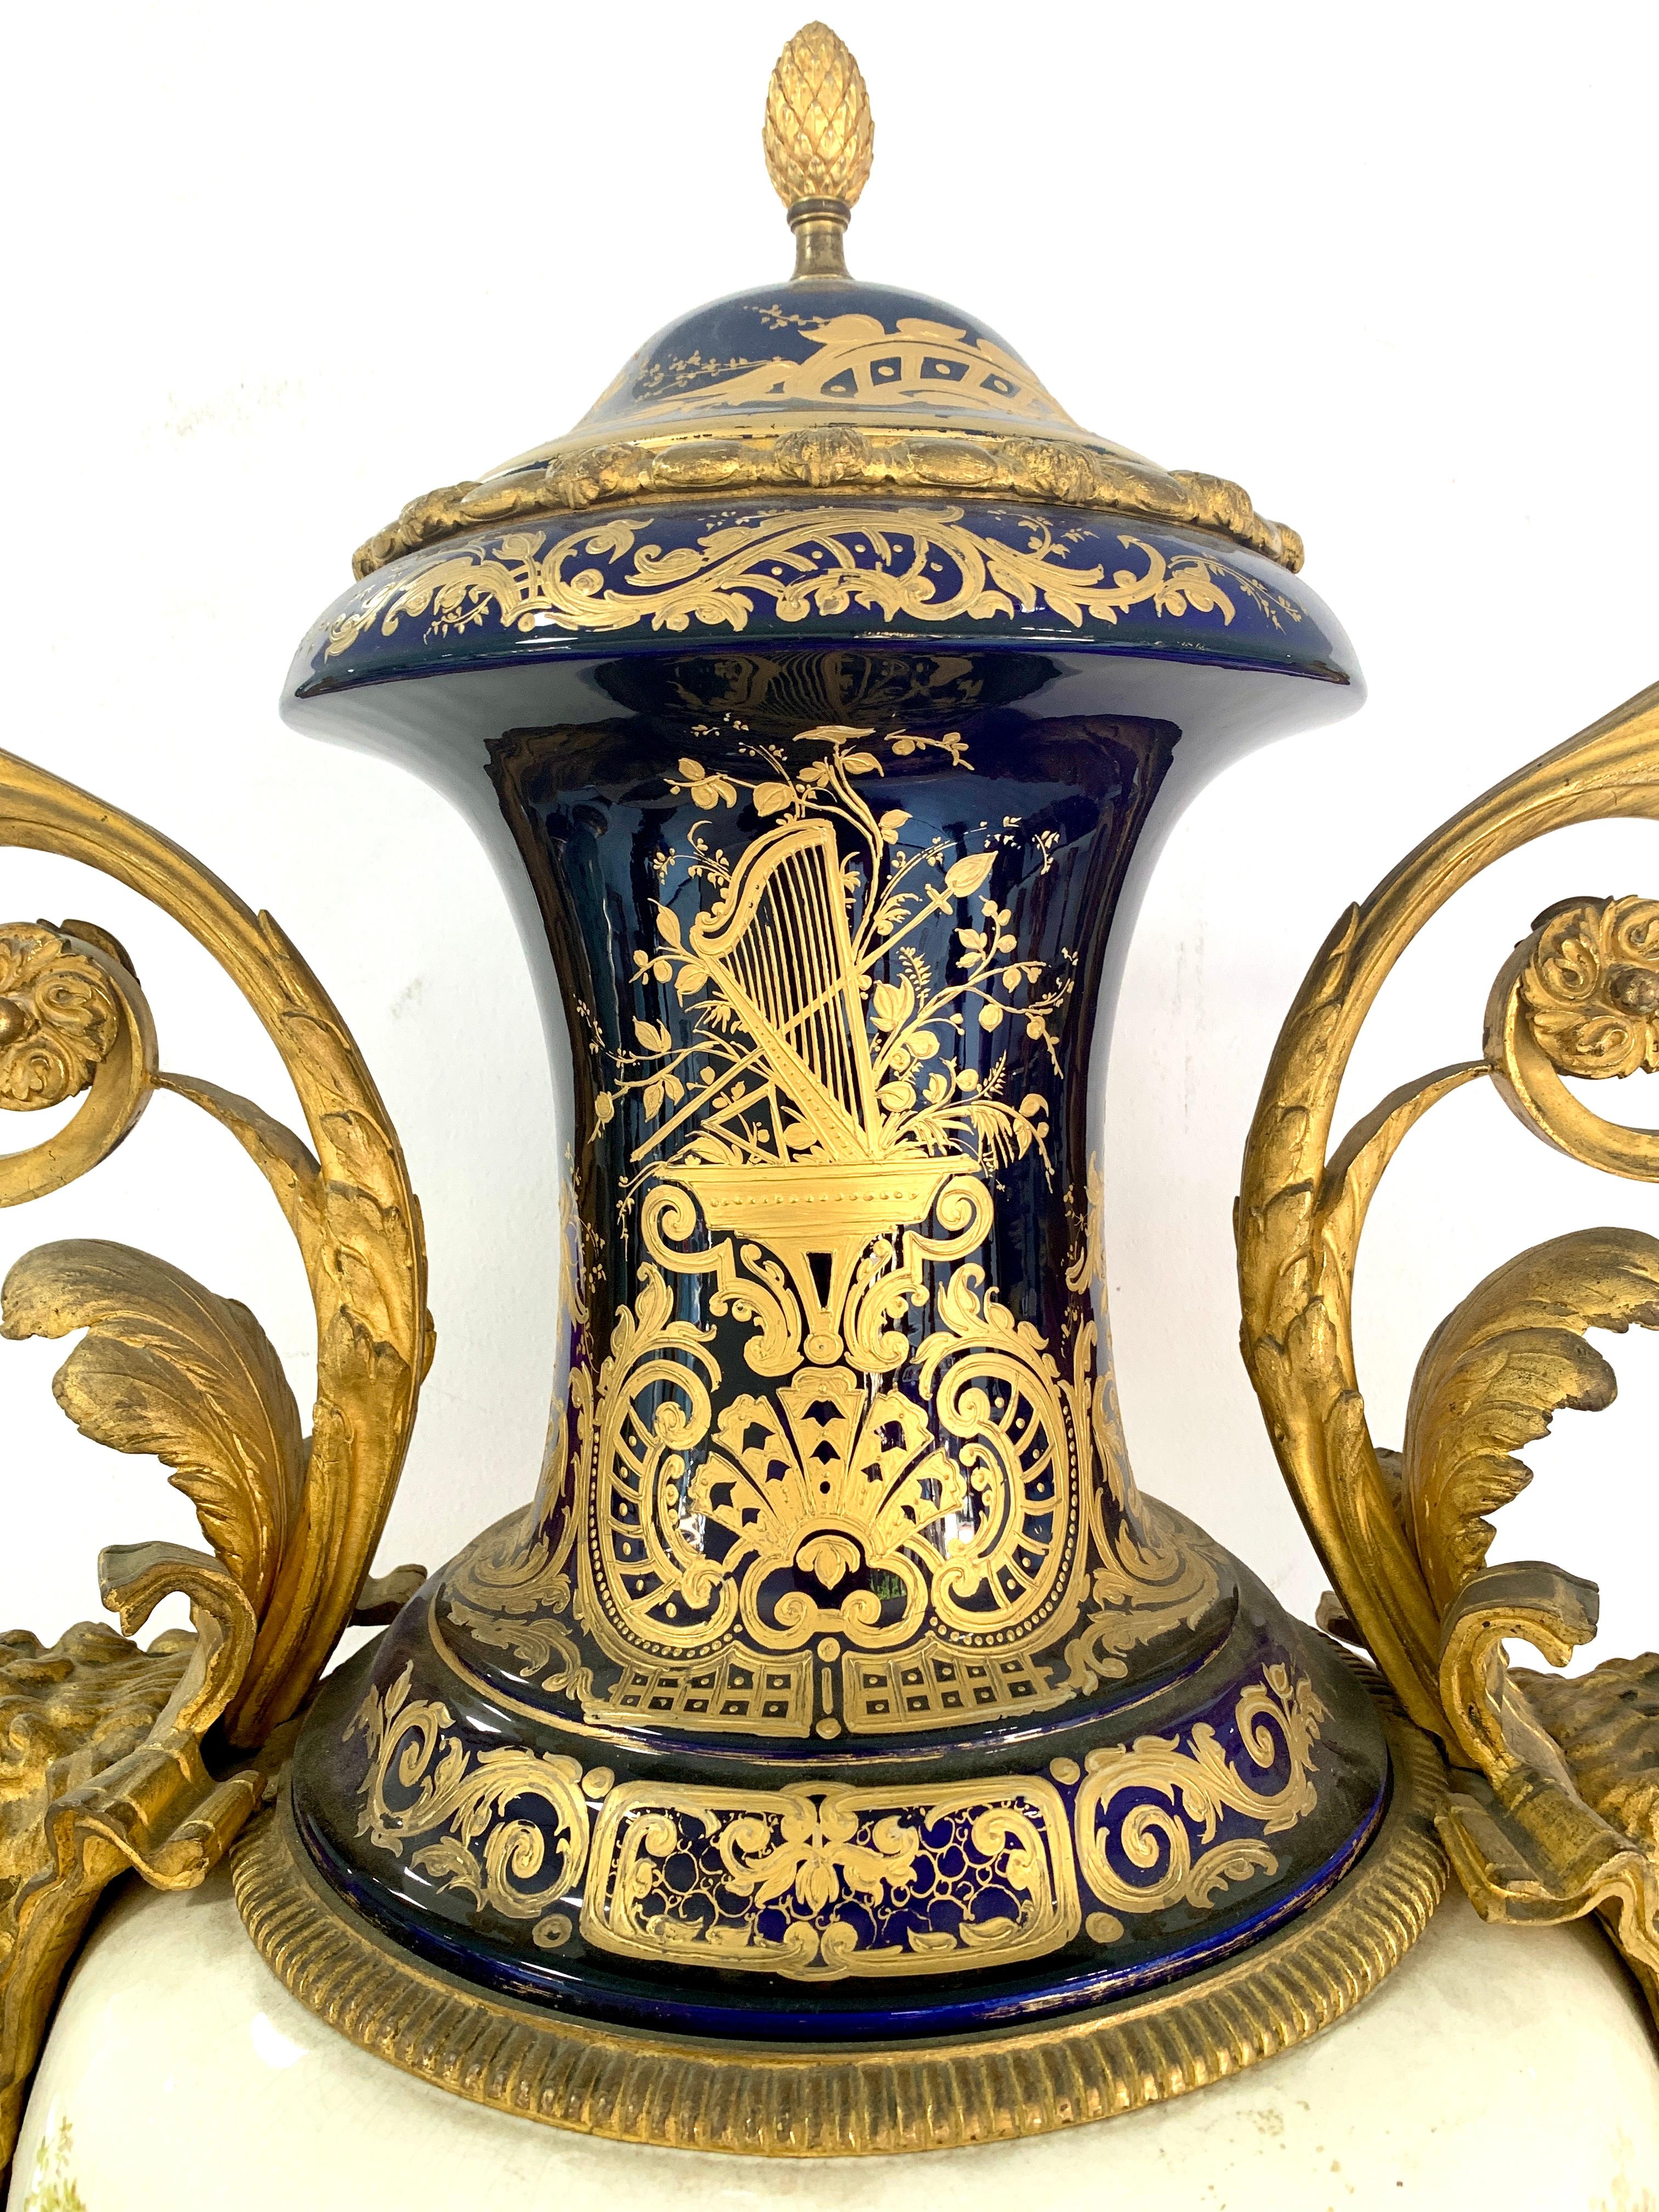 Monumental 19th century French Sevres Porcelain Covered Urn - 66